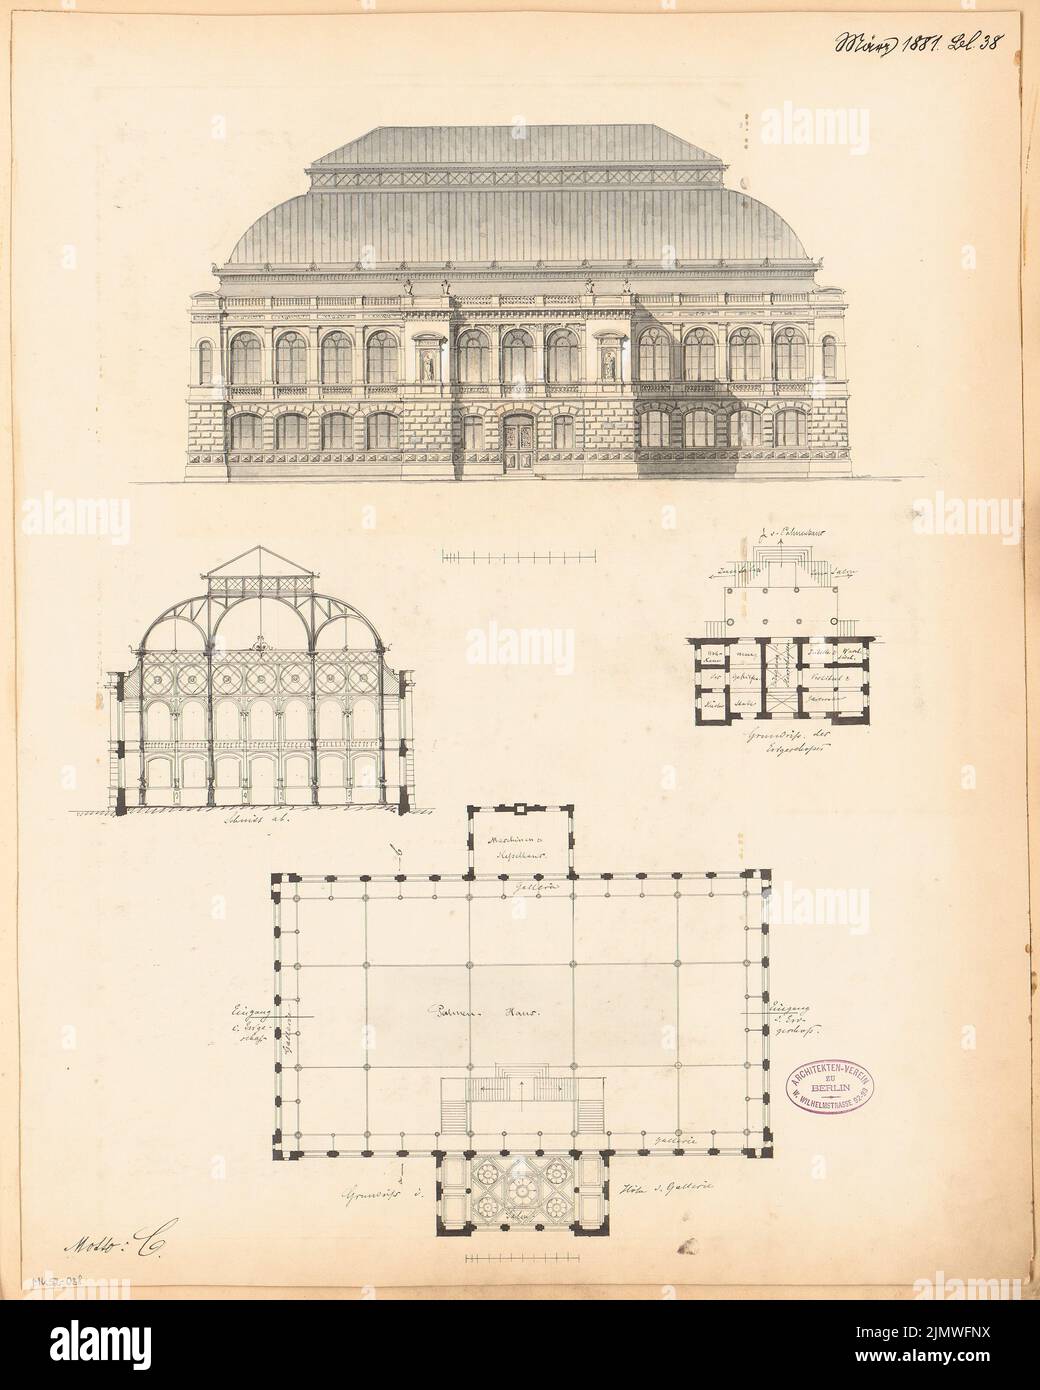 Hesse Paul (1855-1913), palm house. Monthly competition March 1881 (03.1881): floor plan ground floor, upper floor, upright front view, cross -section; 2 scale strips. Tusche watercolor on the box, 56 x 44.8 cm (including scan edges) Hesse Paul  (1855-1913): Palmenhaus. Monatskonkurrenz März 1881 Stock Photo